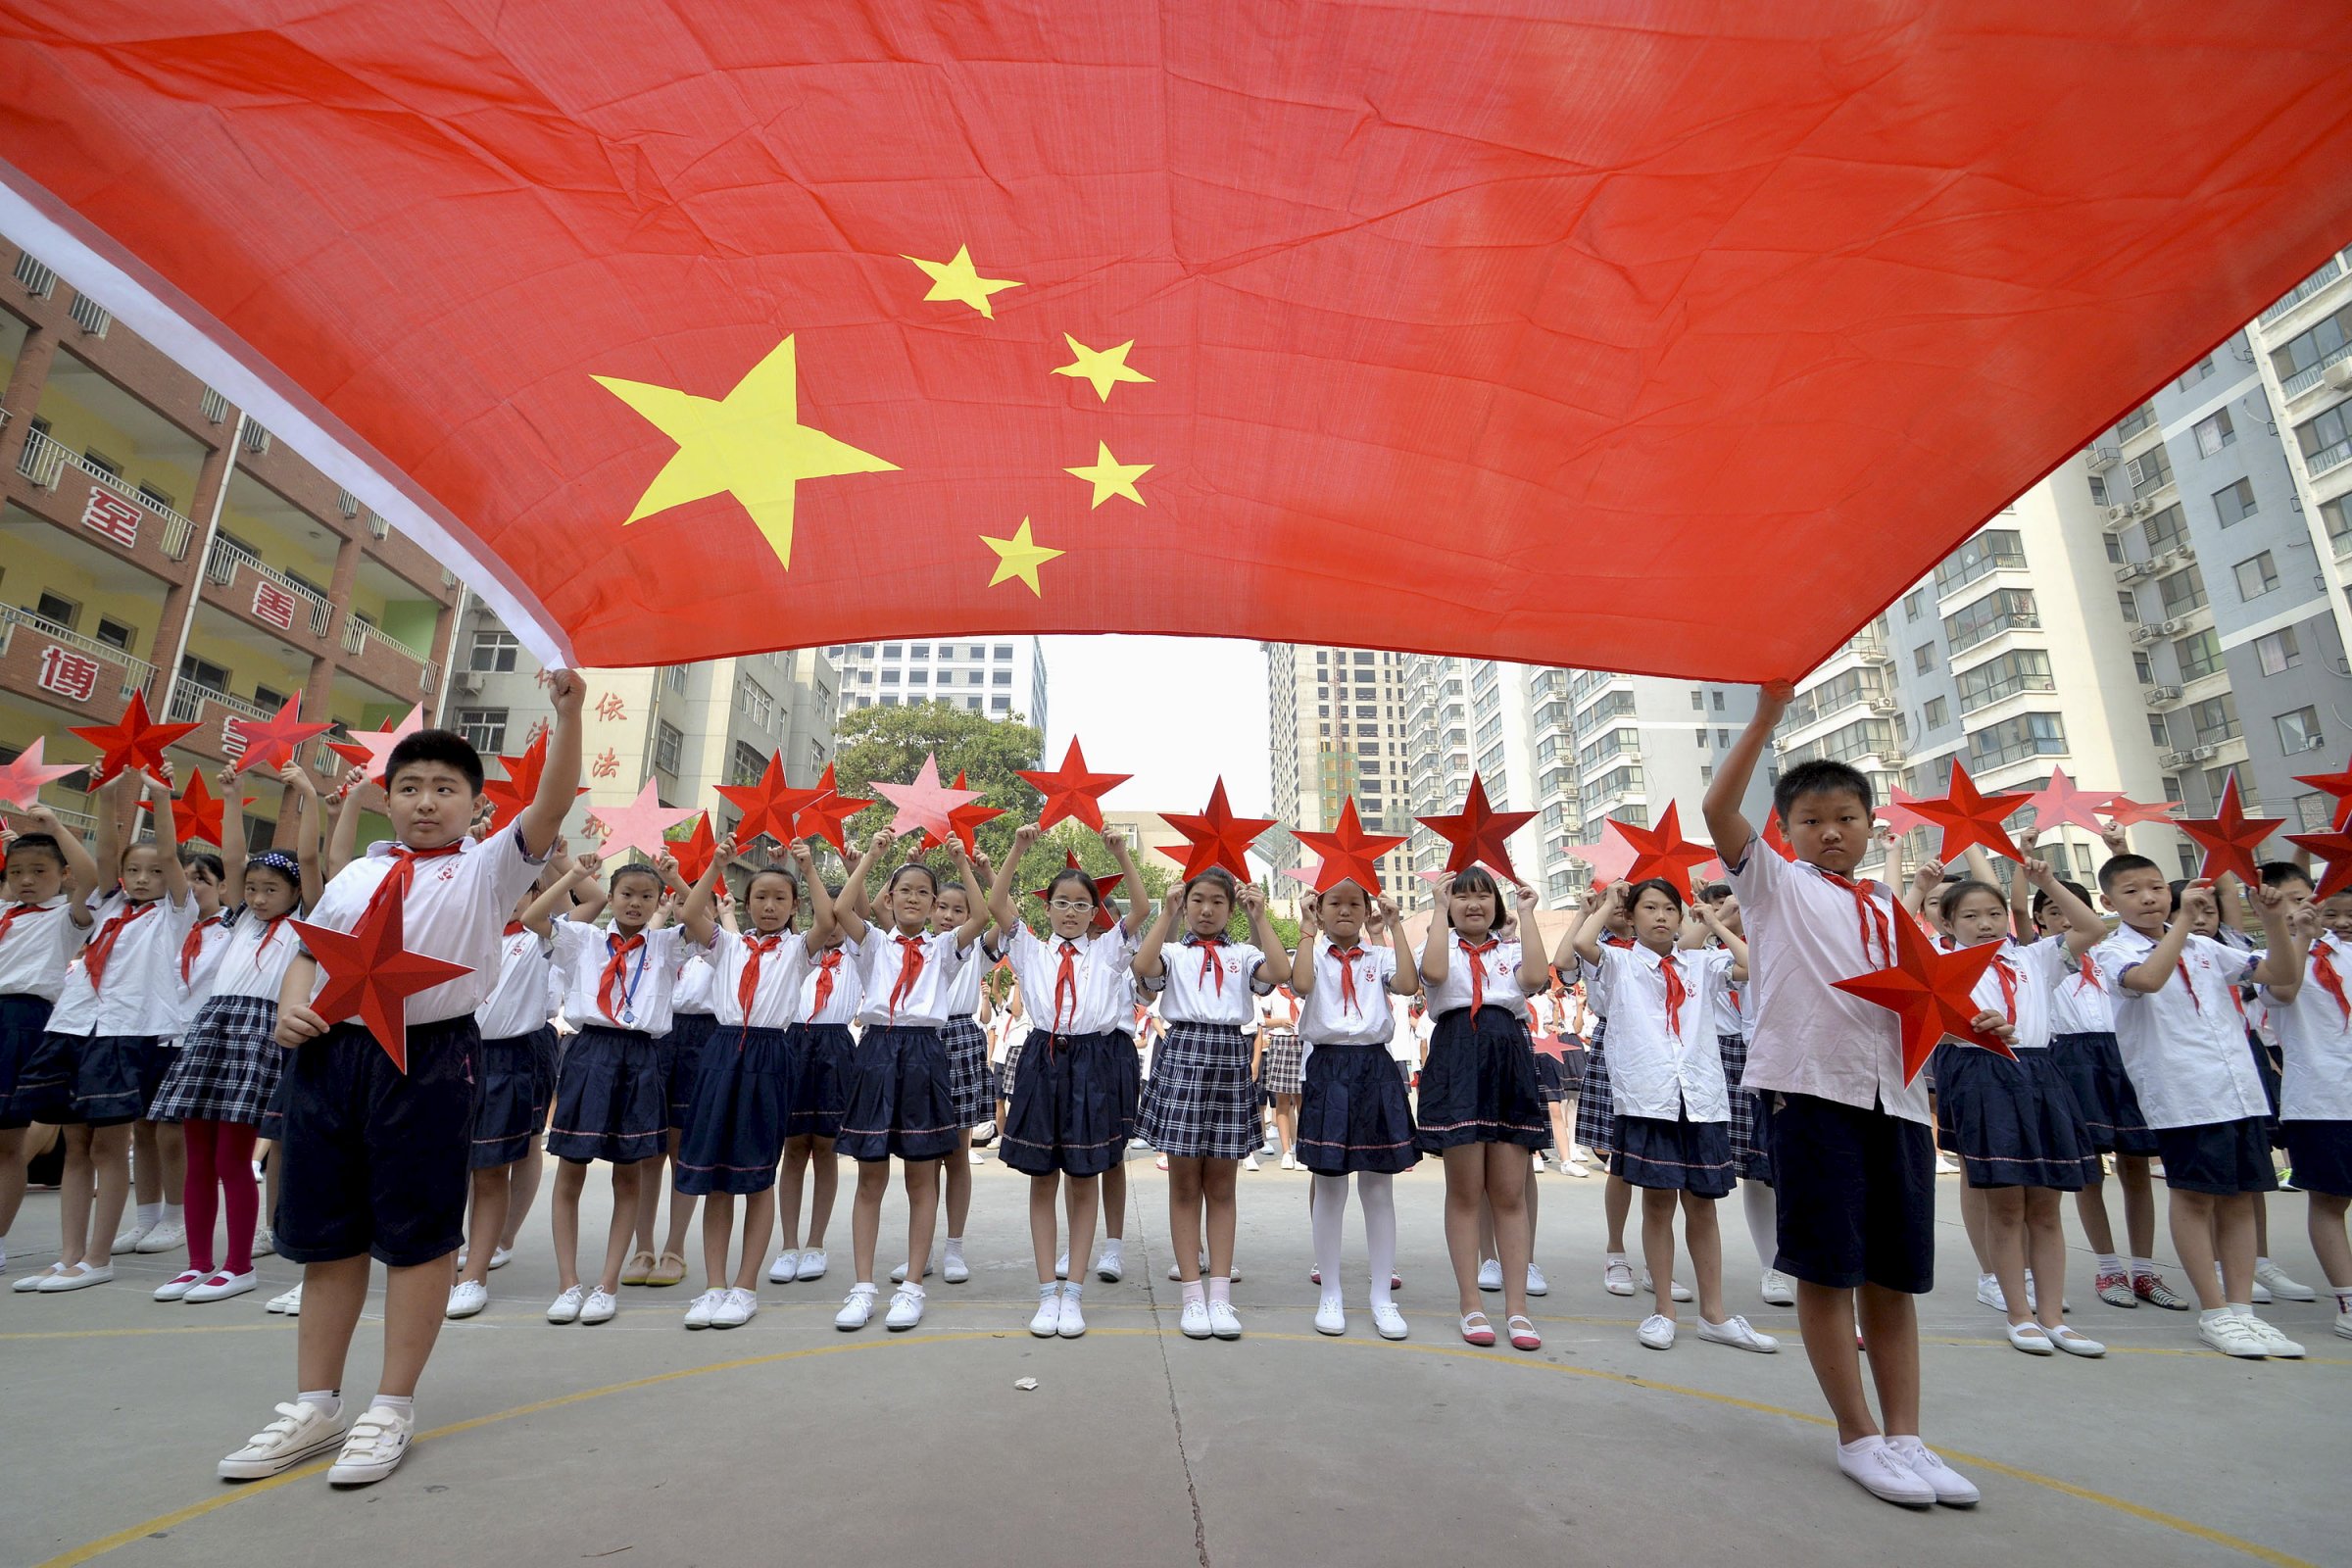 Students pose with a Chinese national flag and red stars during a event to mark the 70th anniversary of the Victory of Chinese People's War of Resistance Against Japanese Aggression and the World Anti-Fascist War, at a primary school in Handan